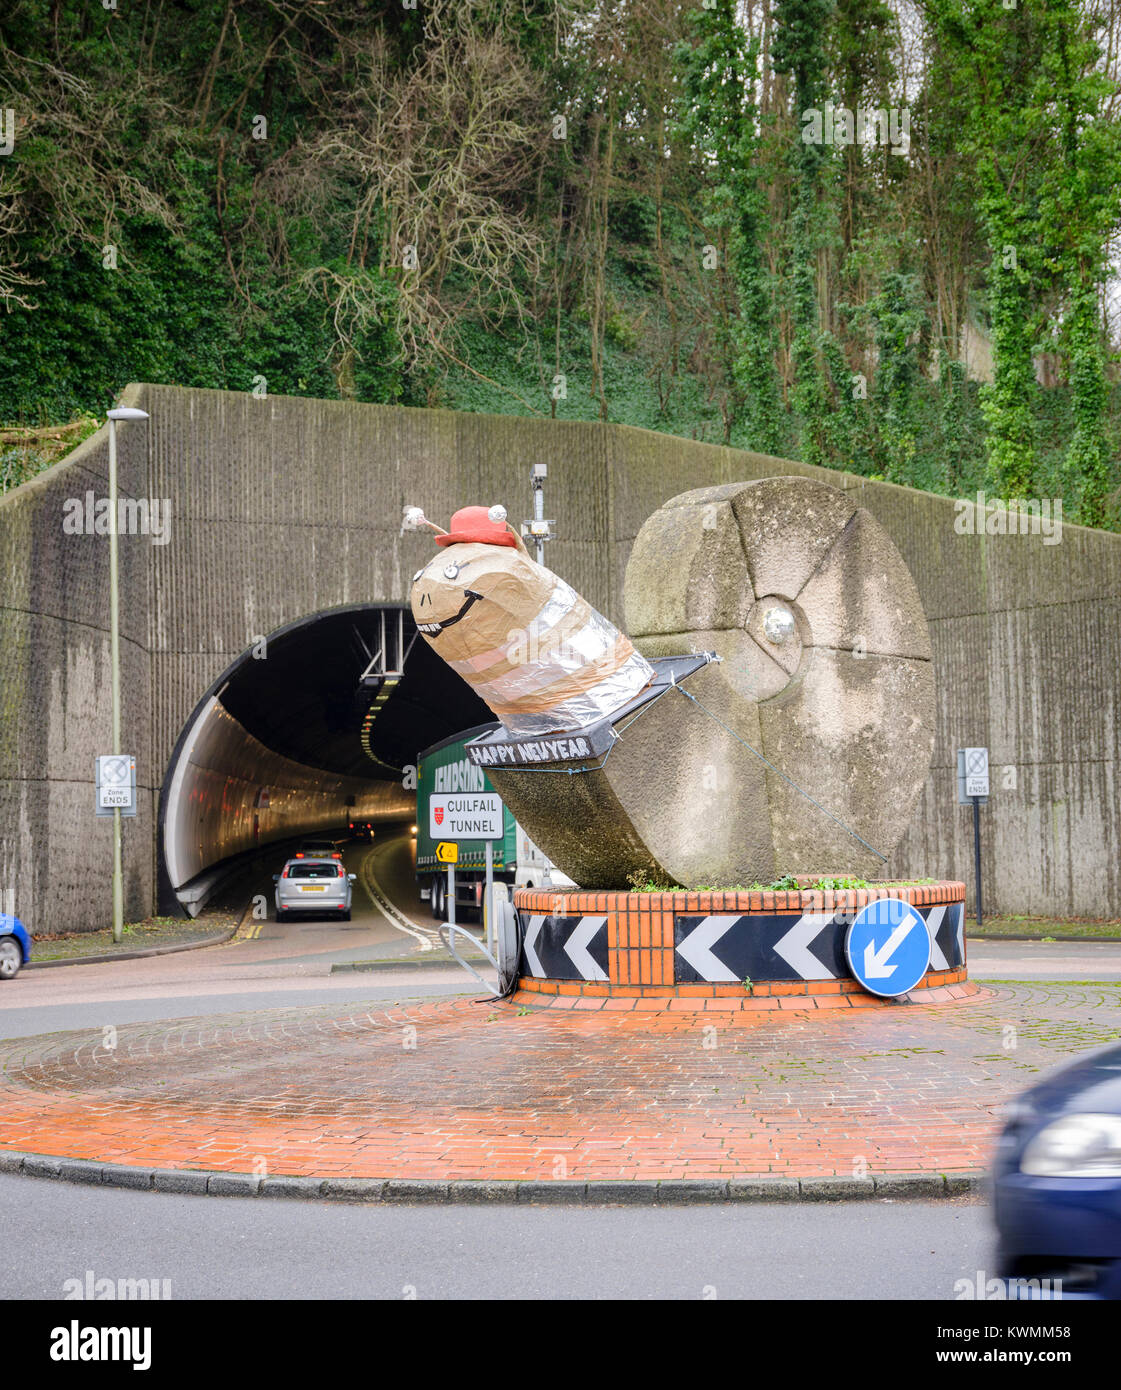 Lewes, UK. 04th Jan, 2018. A snail's head reminiscent of Brian the snail from the Magic Roundabout has been perched atop a sculpture that marks the entrance to the landmark Cuilfail Tunnel in Lewes East Sussex. The message reads Happy New Year. Credit: Jim Holden/Alamy Live News Stock Photo